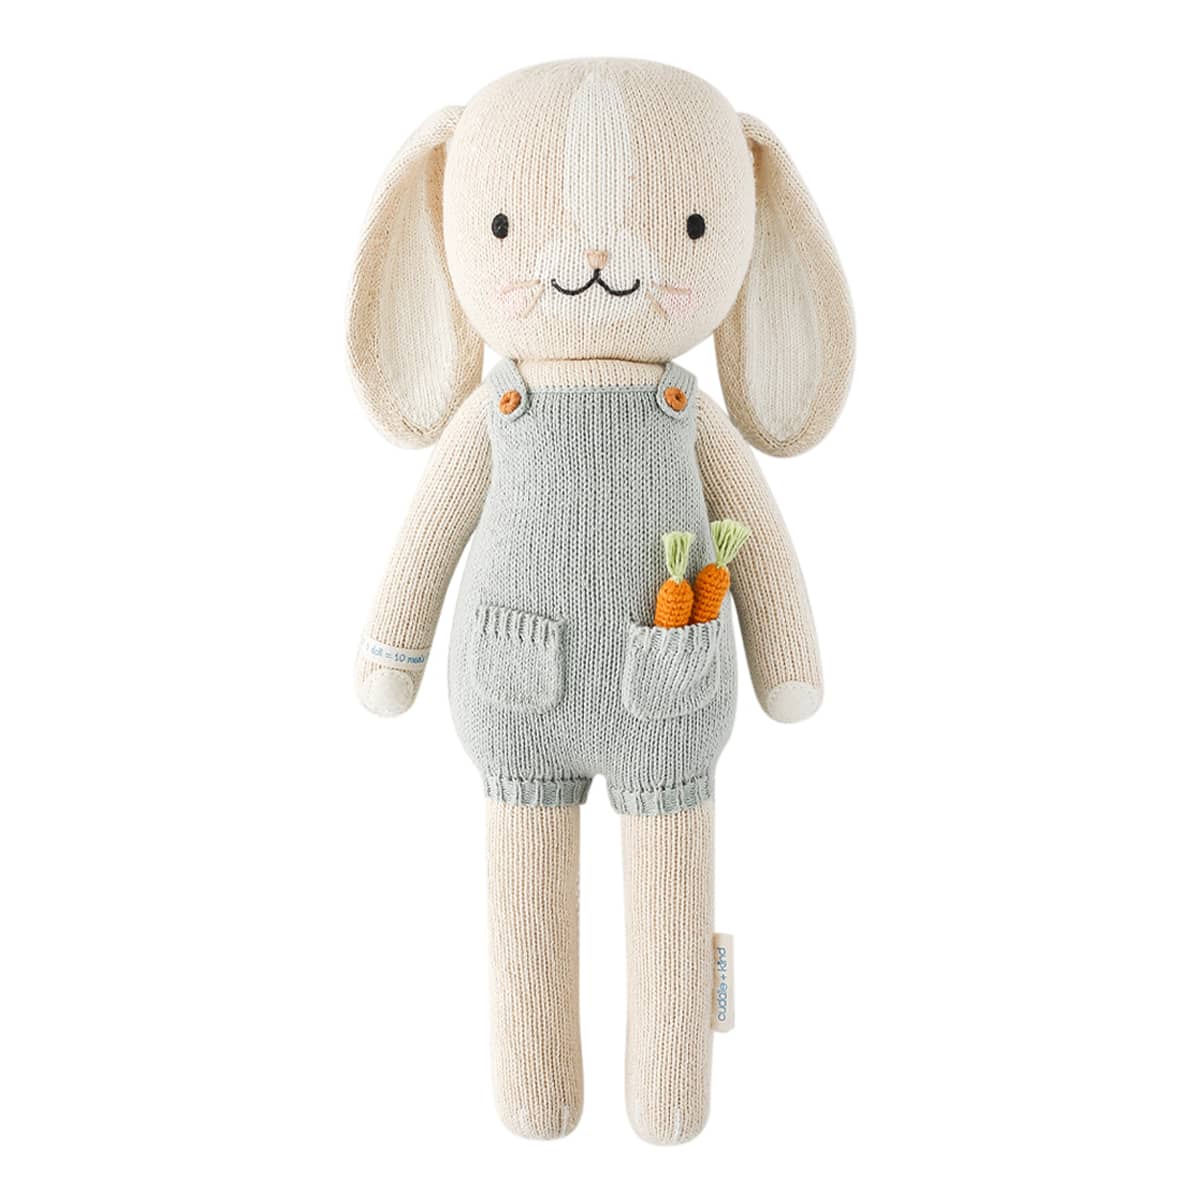 Cuddle + Kind Hand-Knit Doll - Henry the Bunny